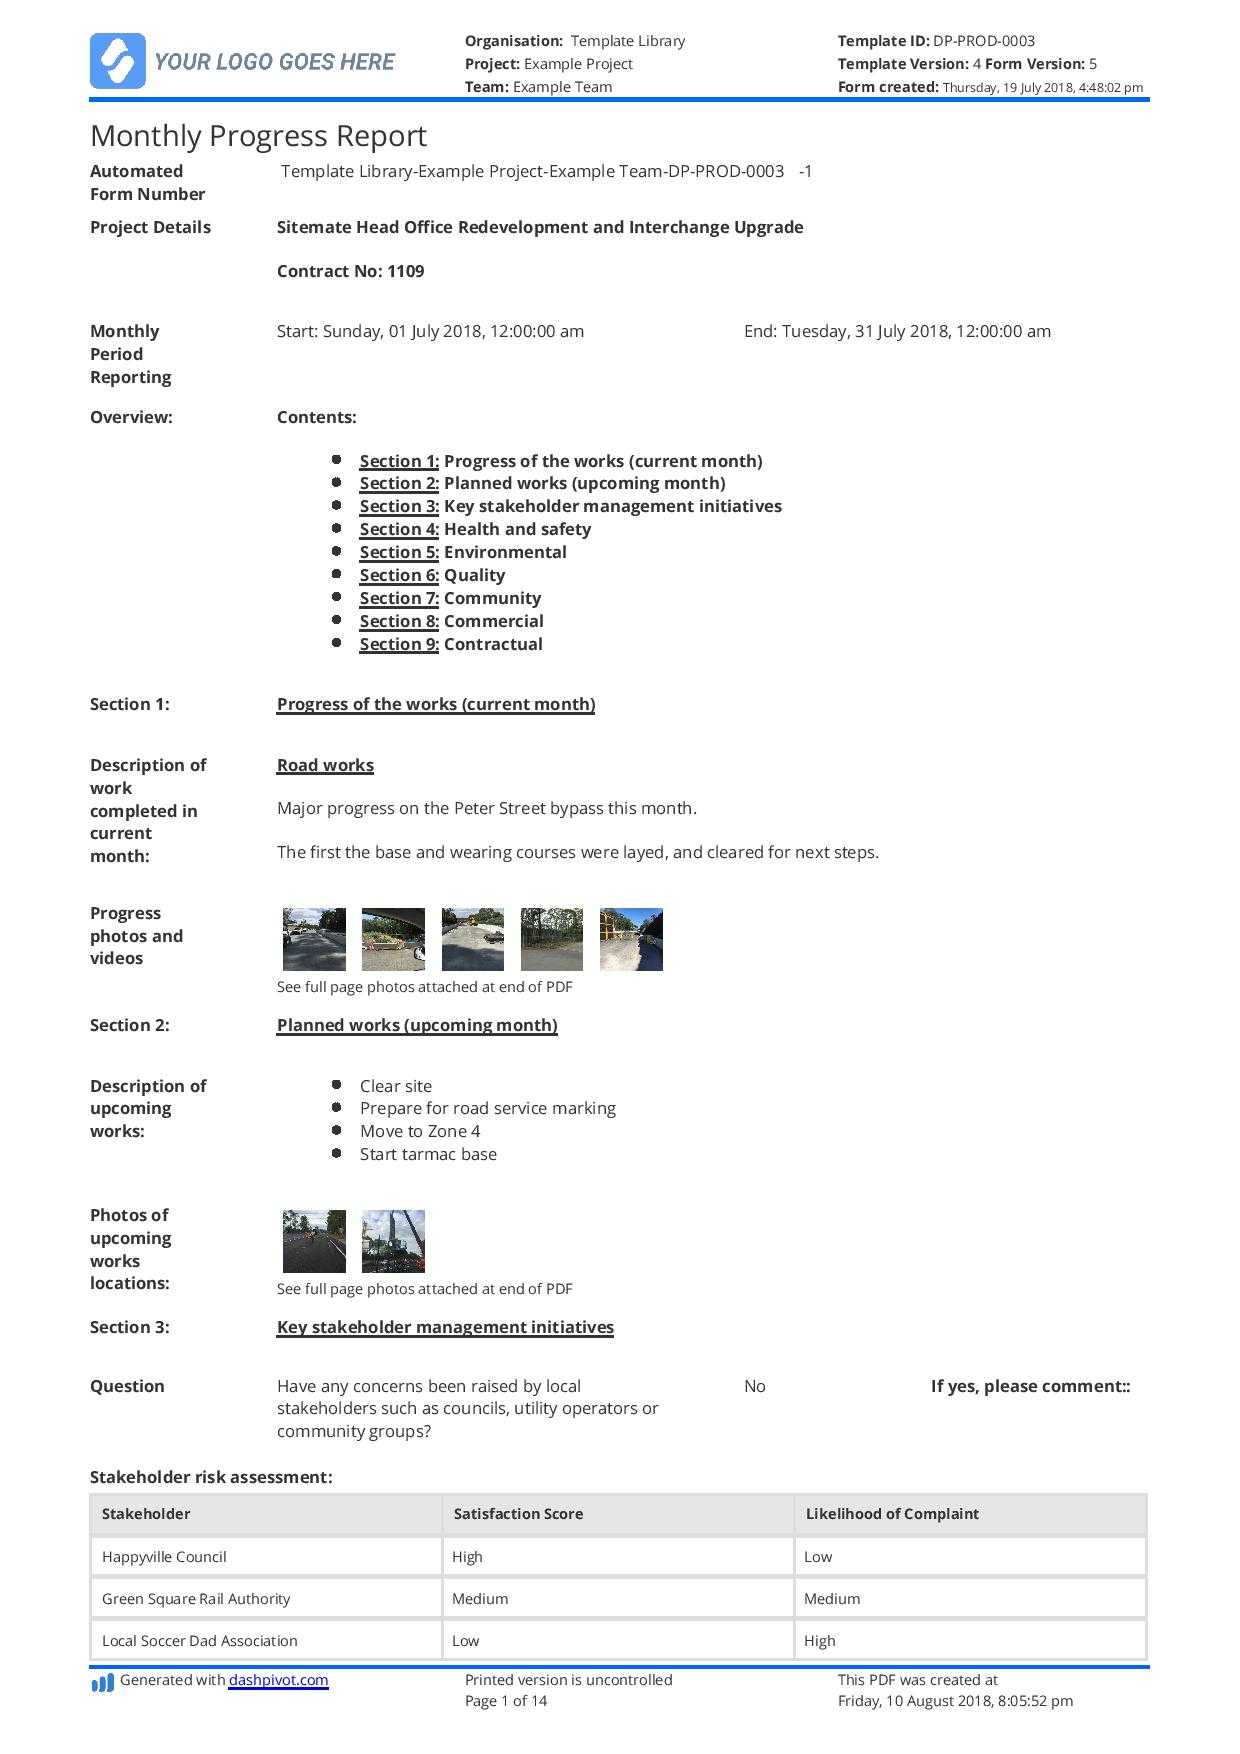 Monthly Construction Progress Report Template: Use This Pertaining To Construction Daily Progress Report Template